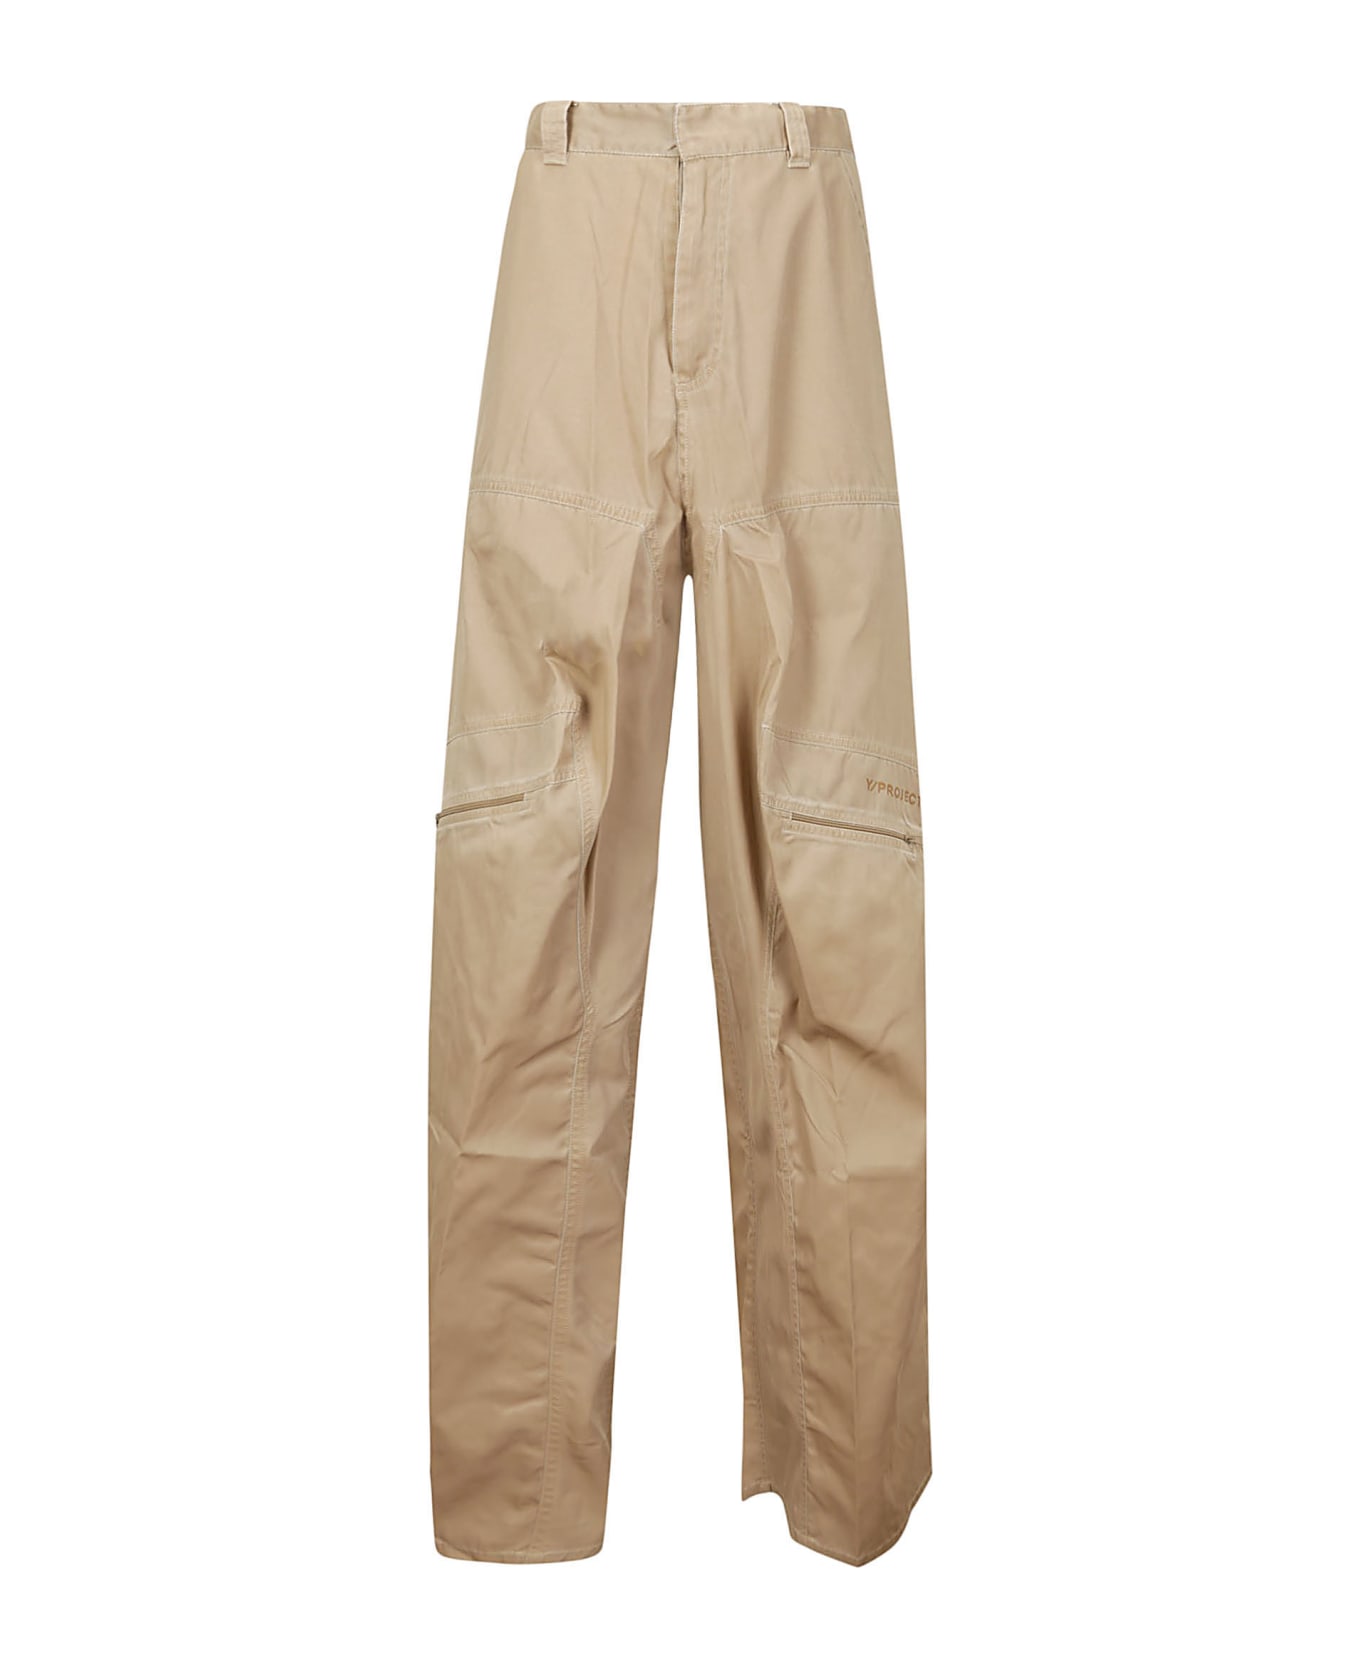 Y/Project Pop-up Pants - WASHED BEIGE ボトムス